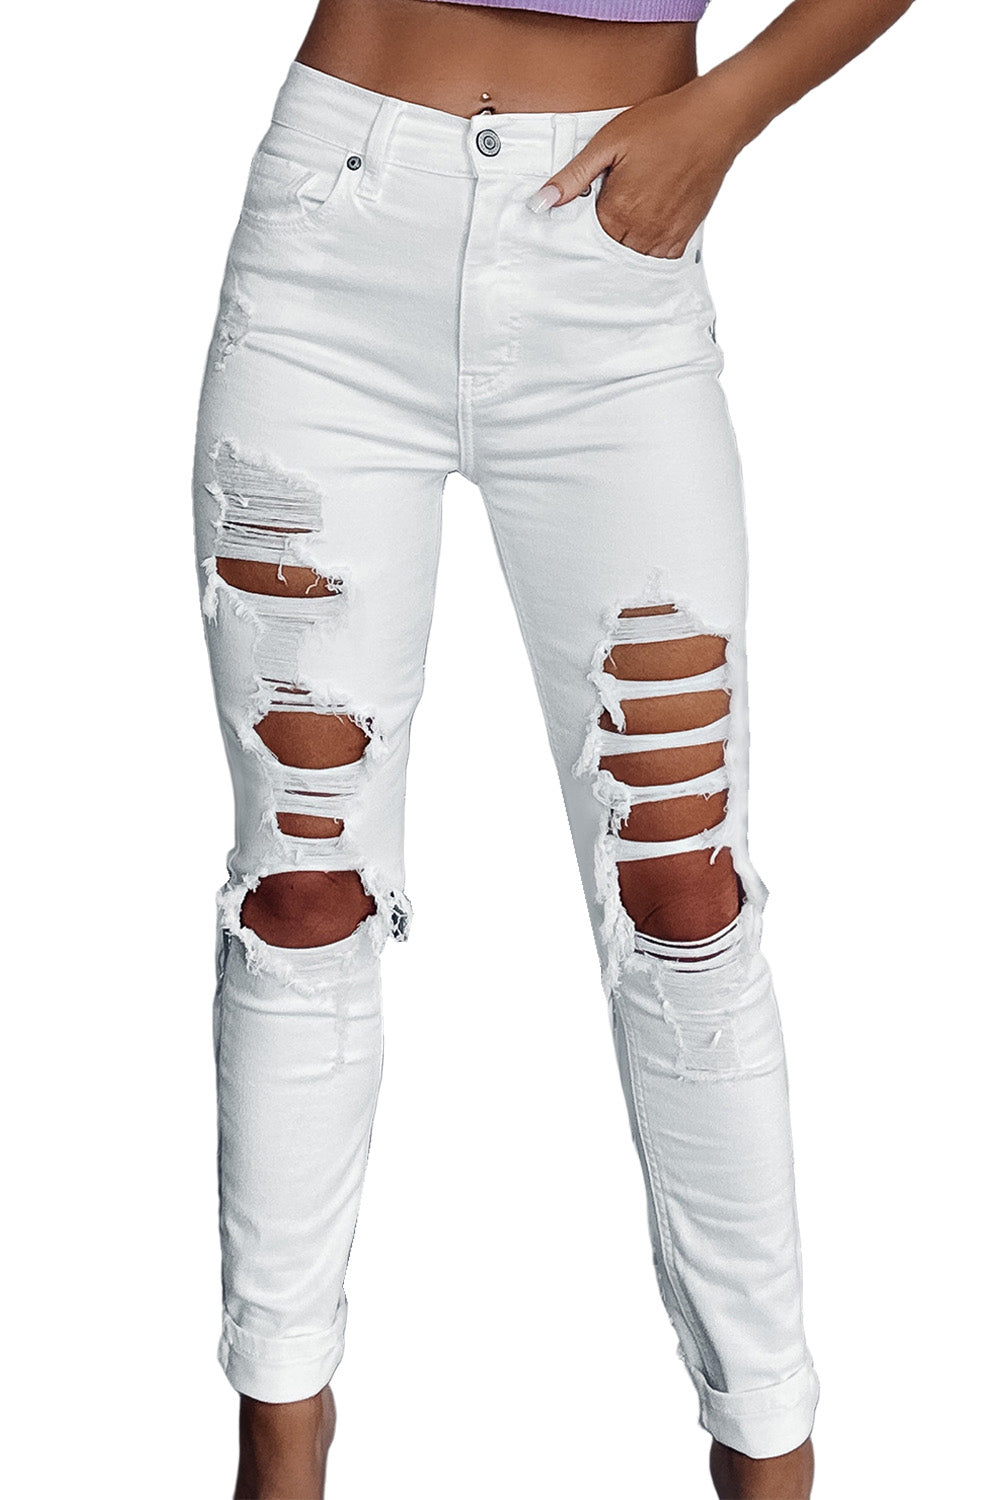 White Distressed Ripped Holes High Waist Skinny Jeans-2